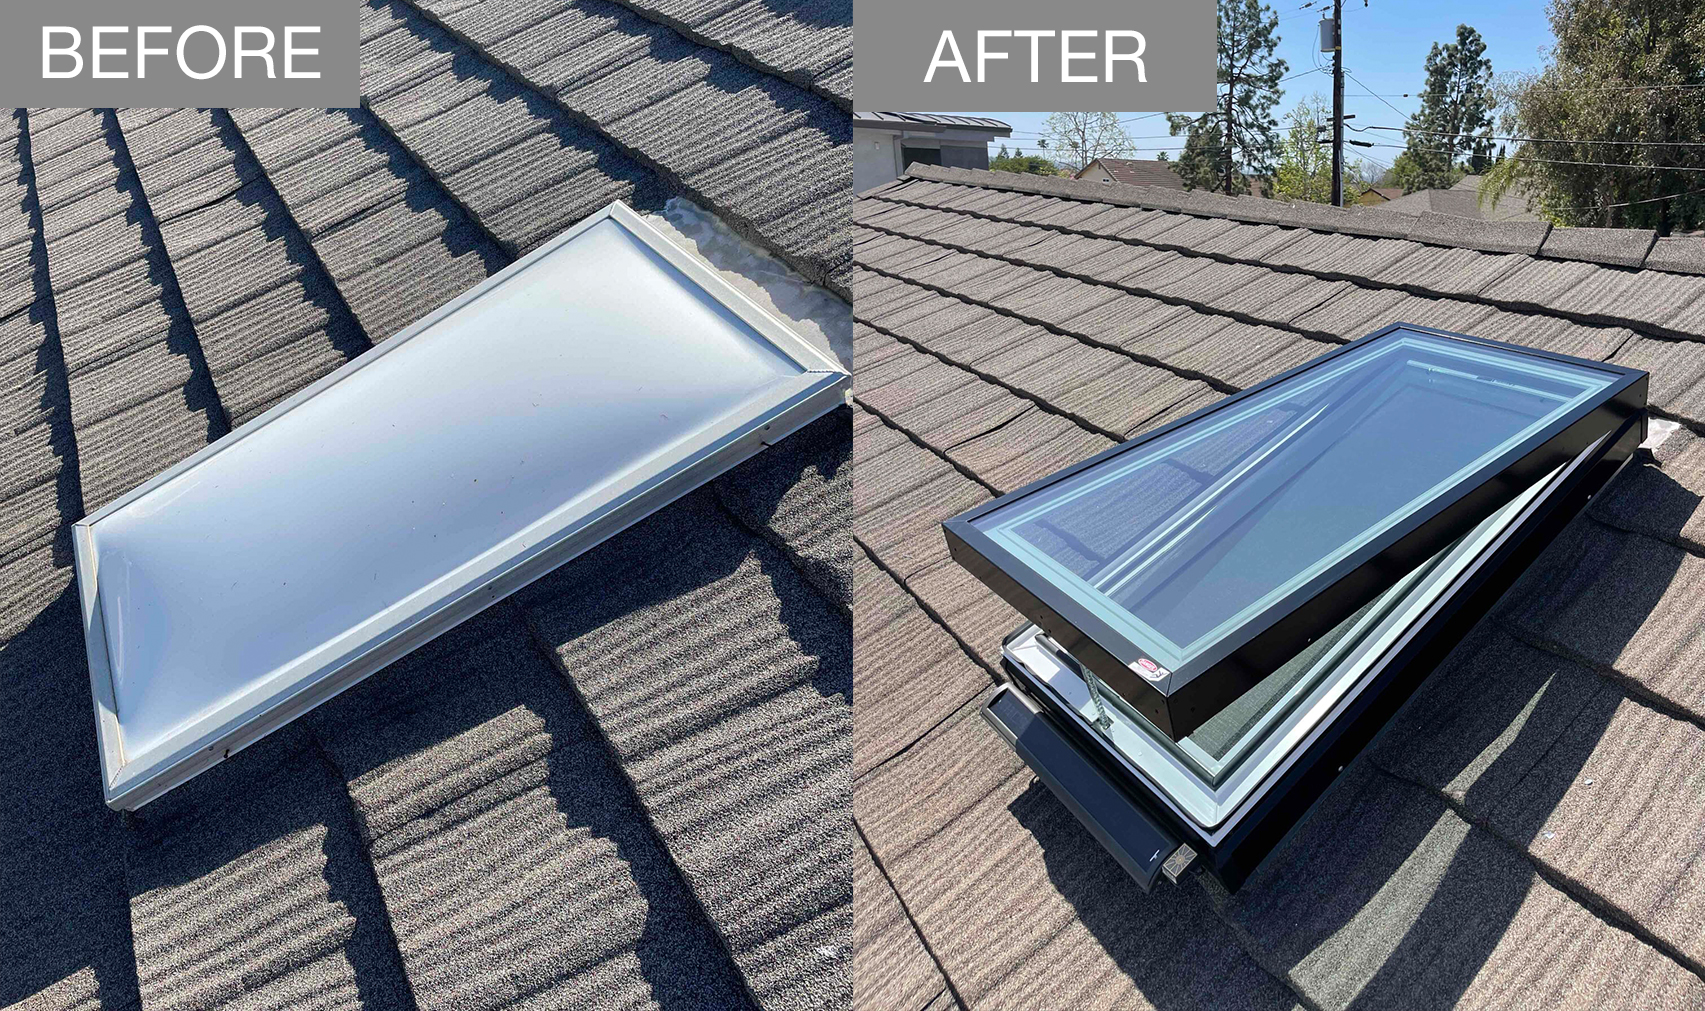 Skylight Before and After